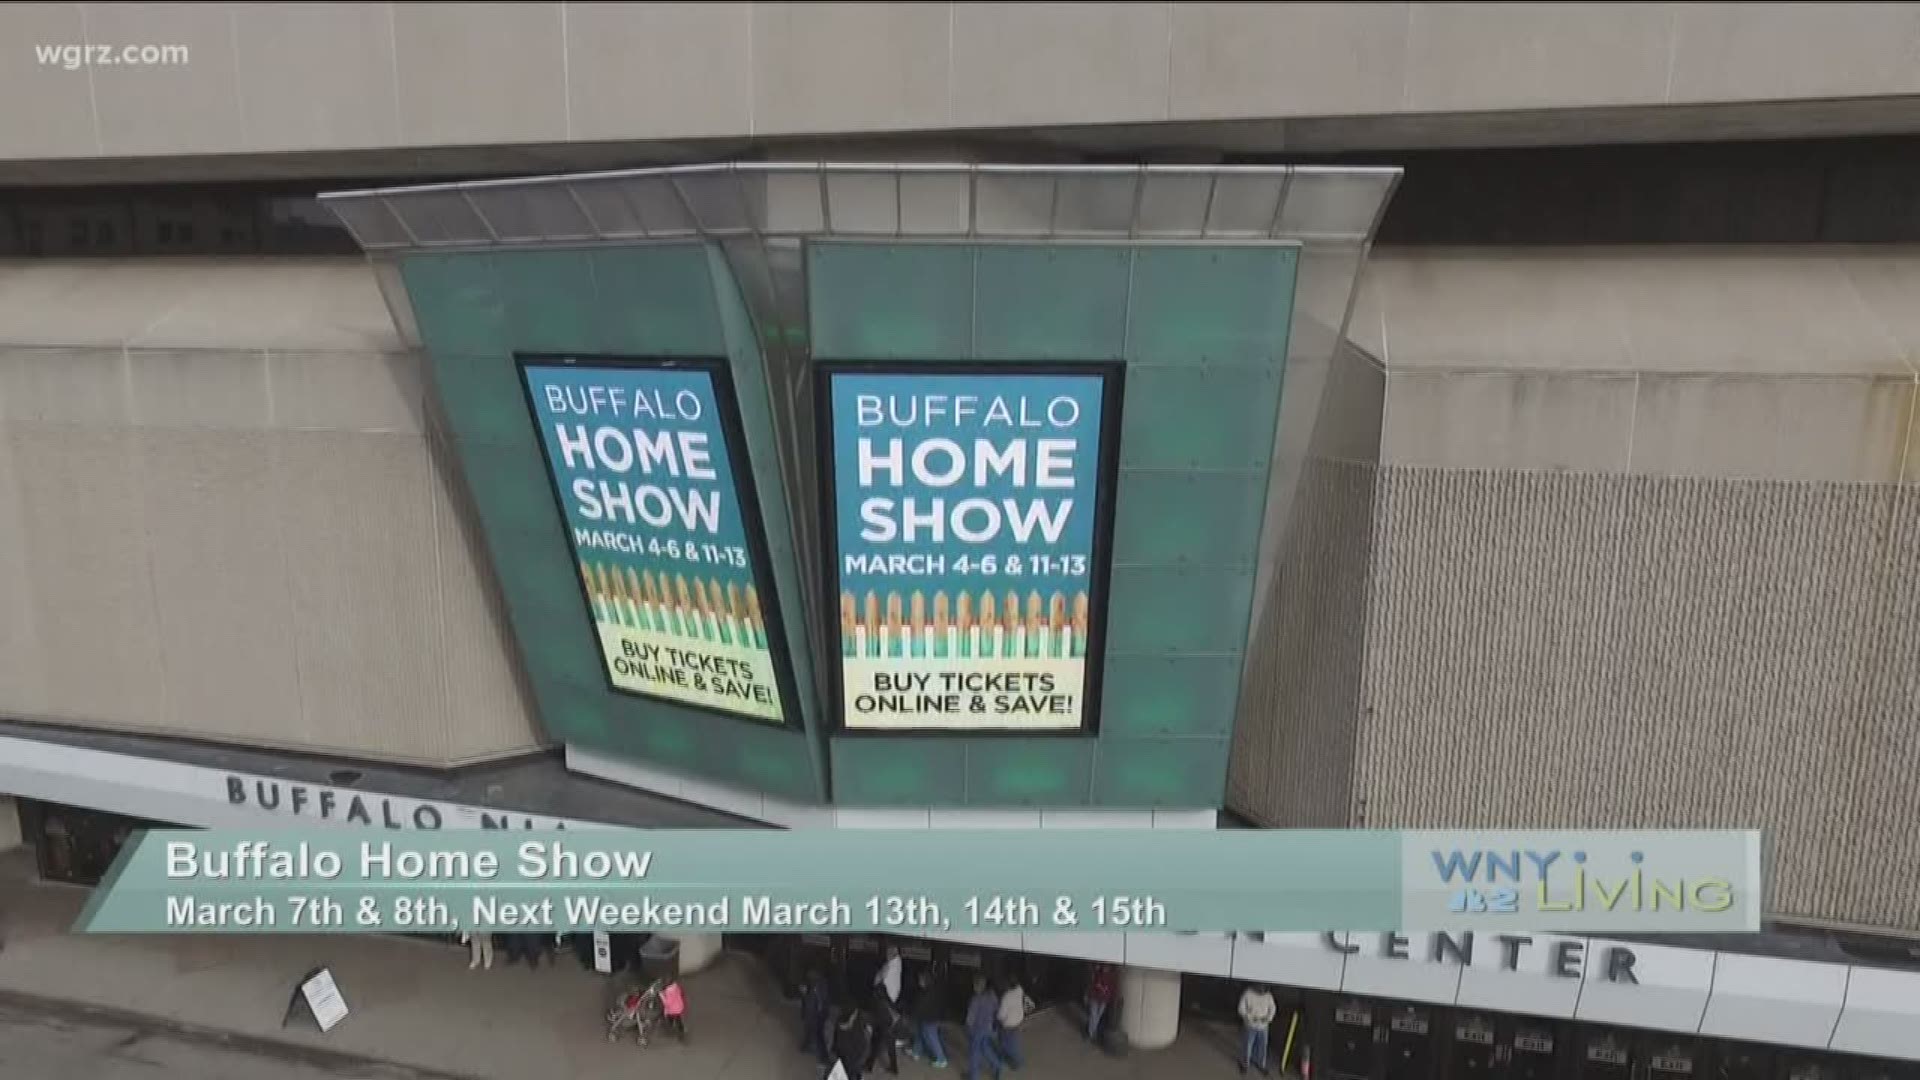 March 7 - Buffalo Home Show (THIS VIDEO IS SPONSORED BY BUFFALO HOME SHOW)